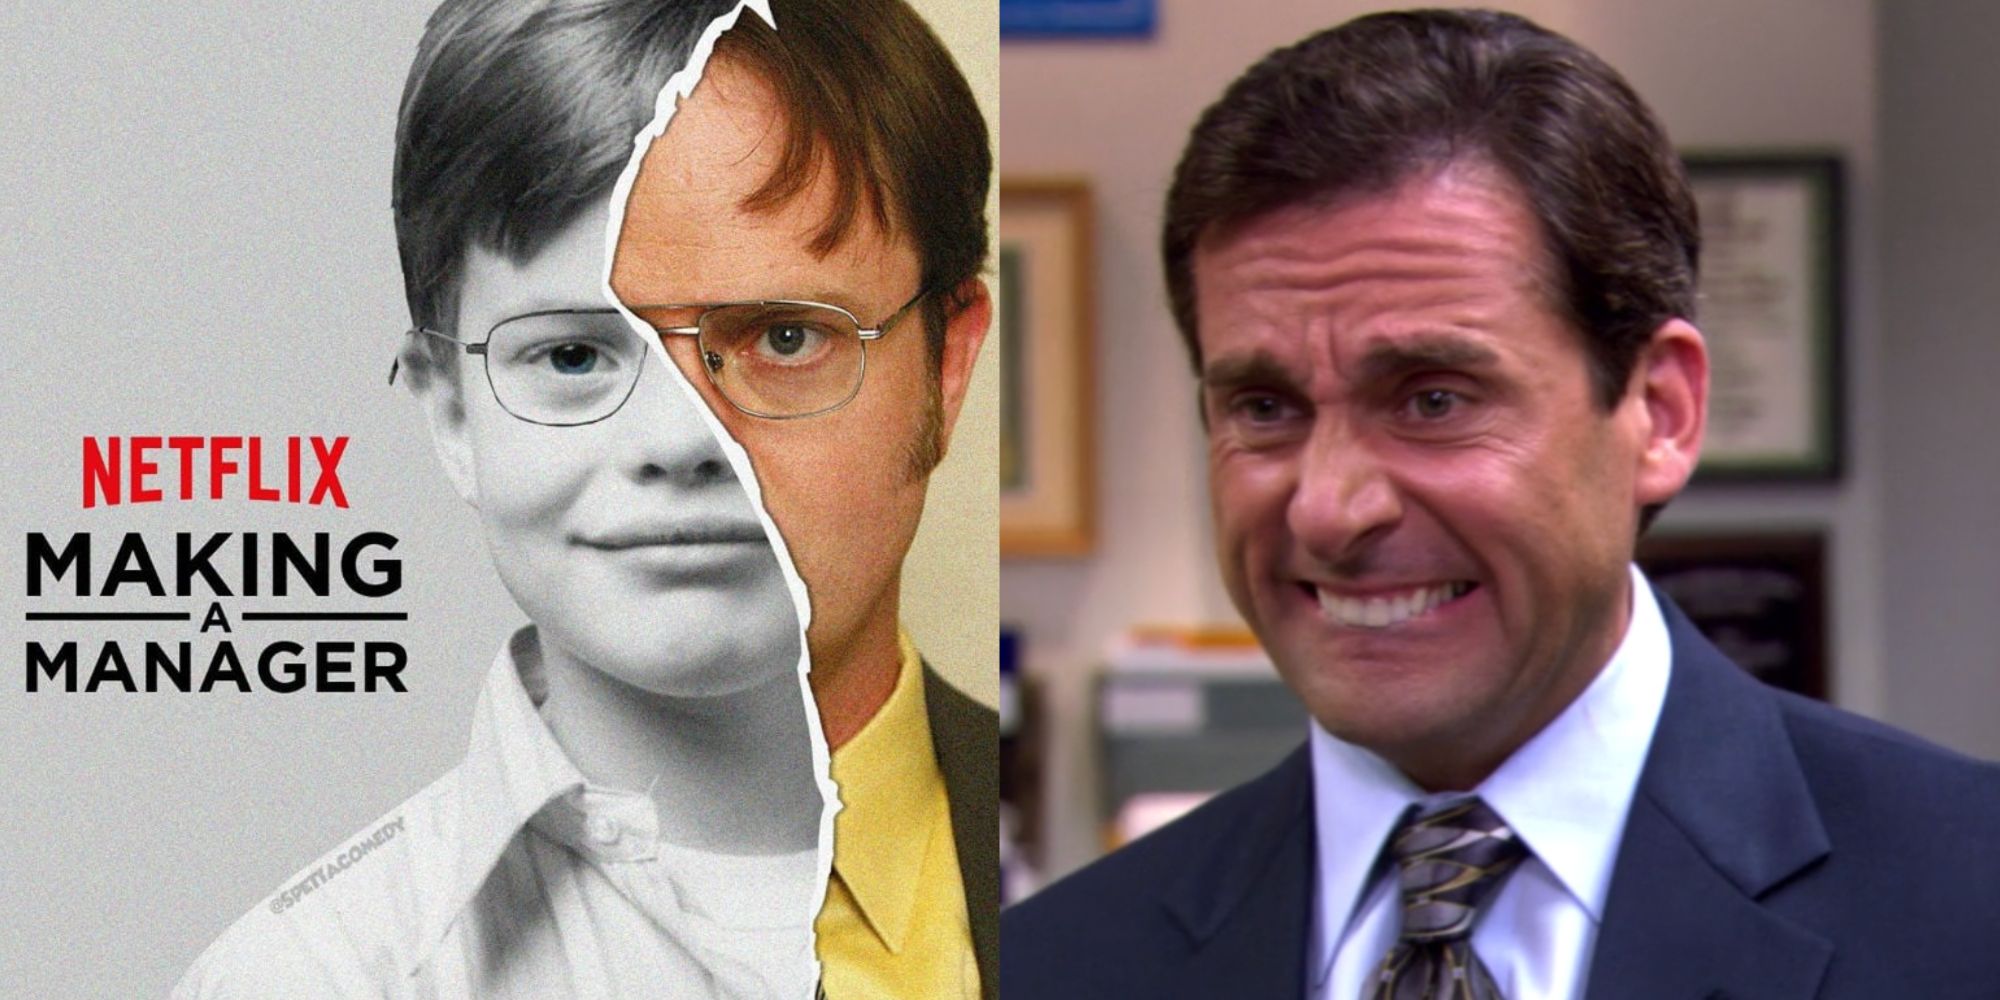 The Office: 14 Memes That Sum Up The Show Perfectly